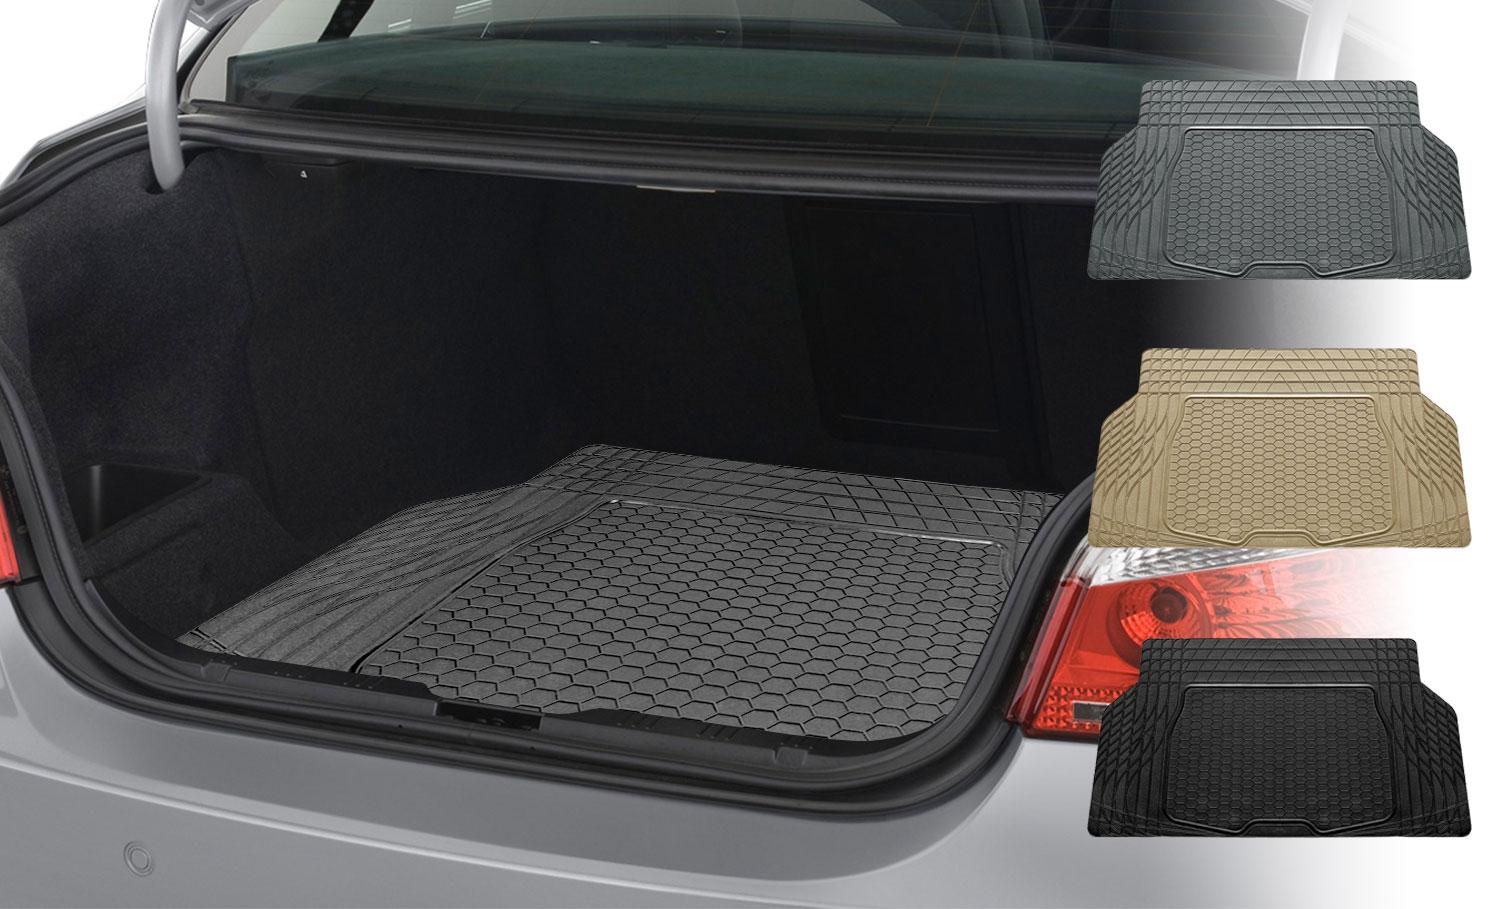 Nitoyo Heavy Duty Rubber Truck Cargo Liners Floor Mats to Fit for Car SUV Van Trucks